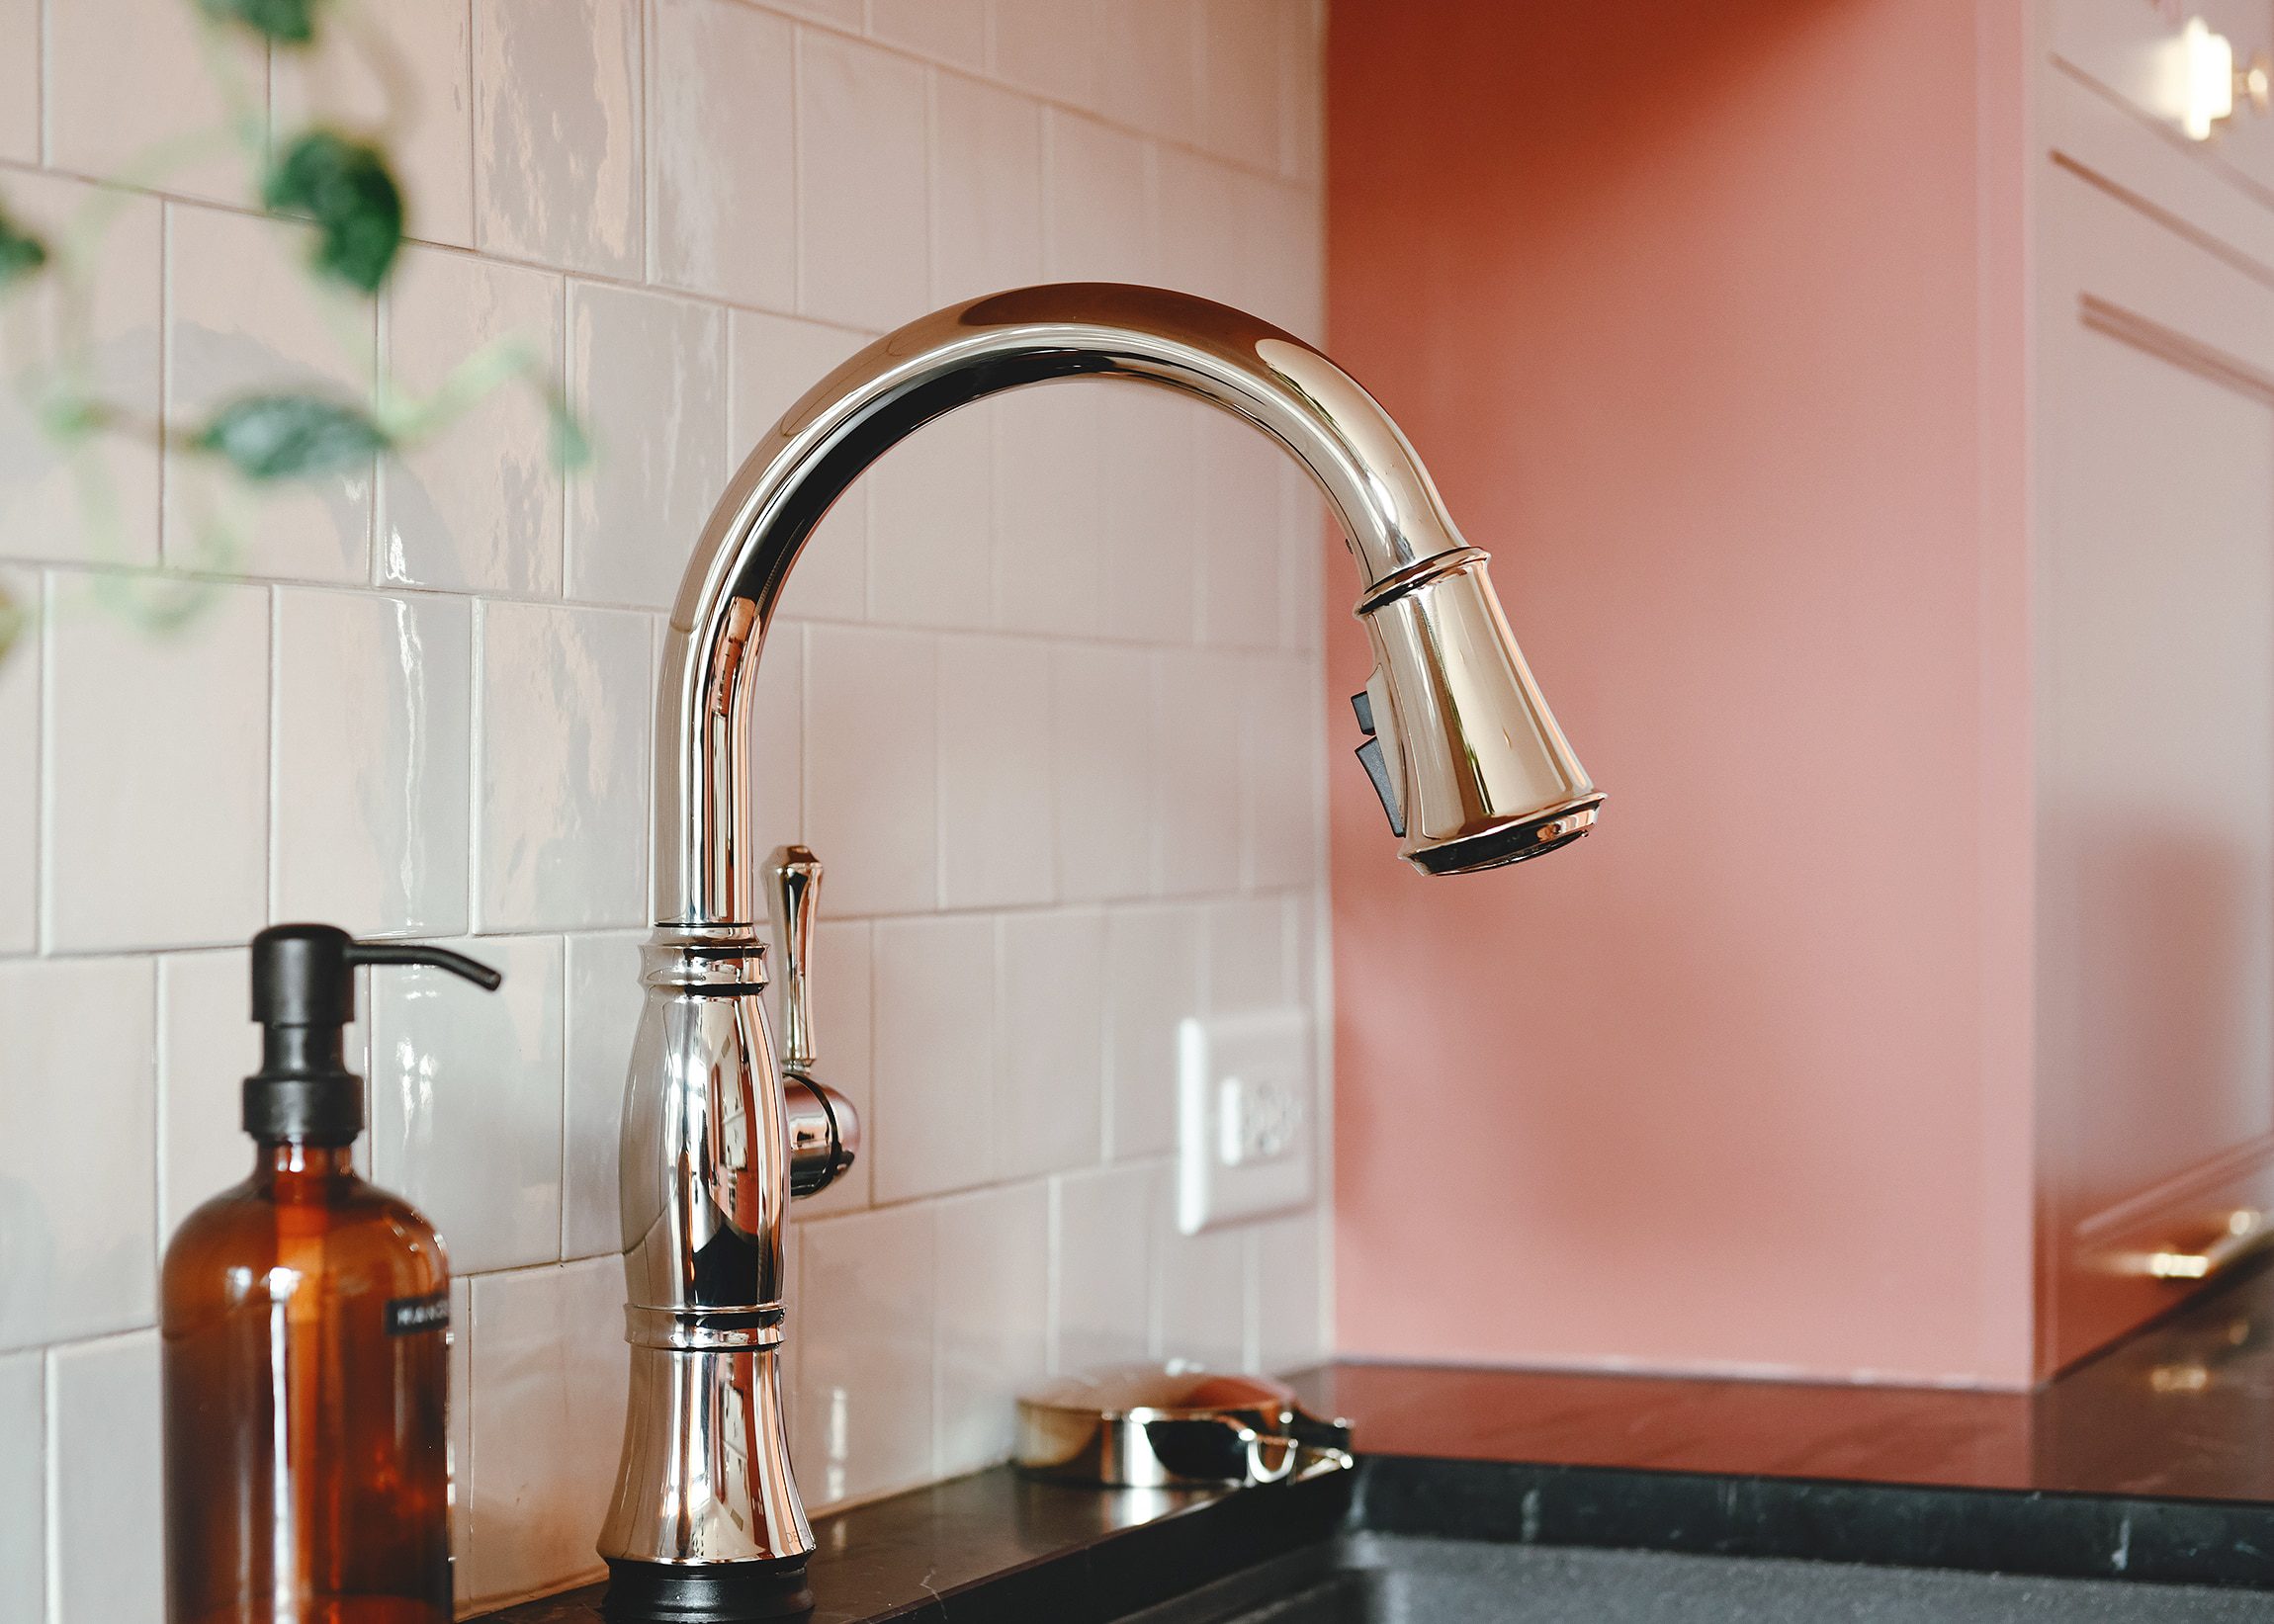 Our Cassidy Faucet in polished nickel // via Yellow Brick Home